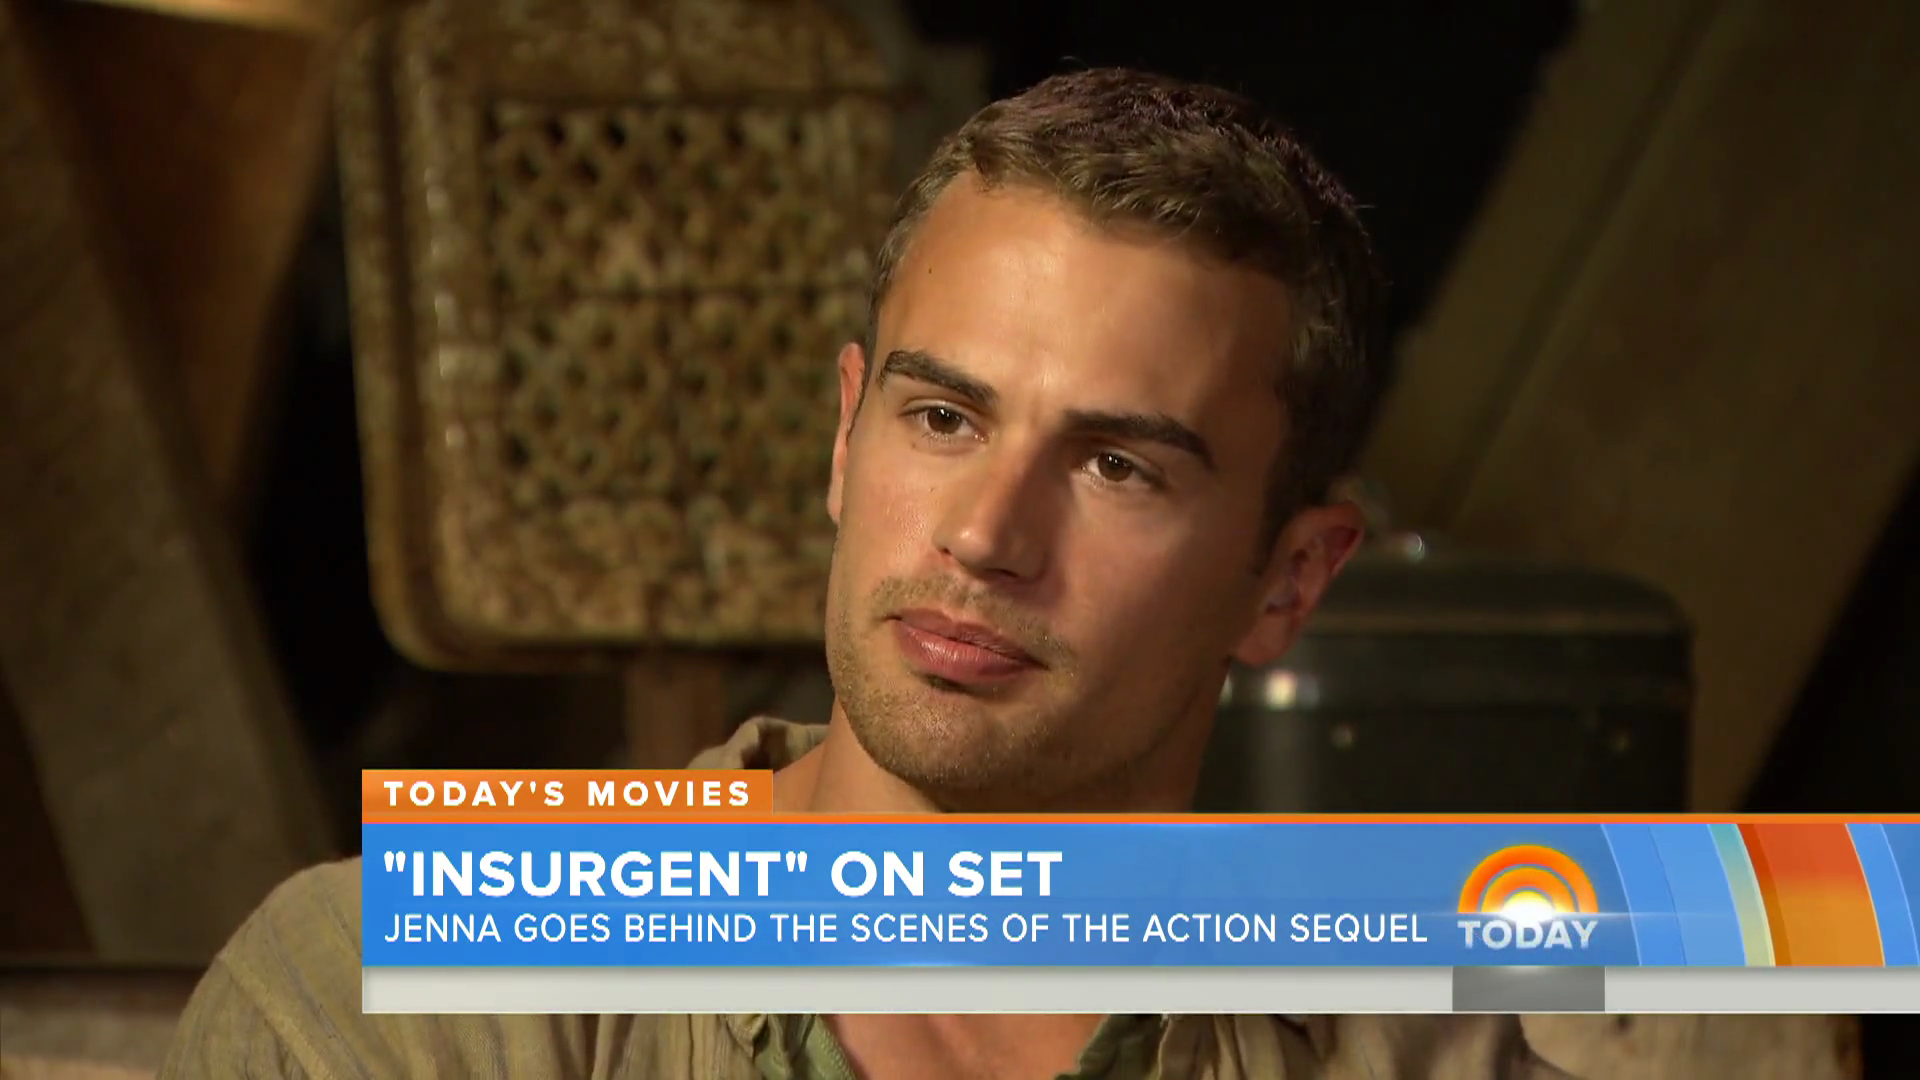 WATCH: Insurgent Set Cast Interviews On The Today Show